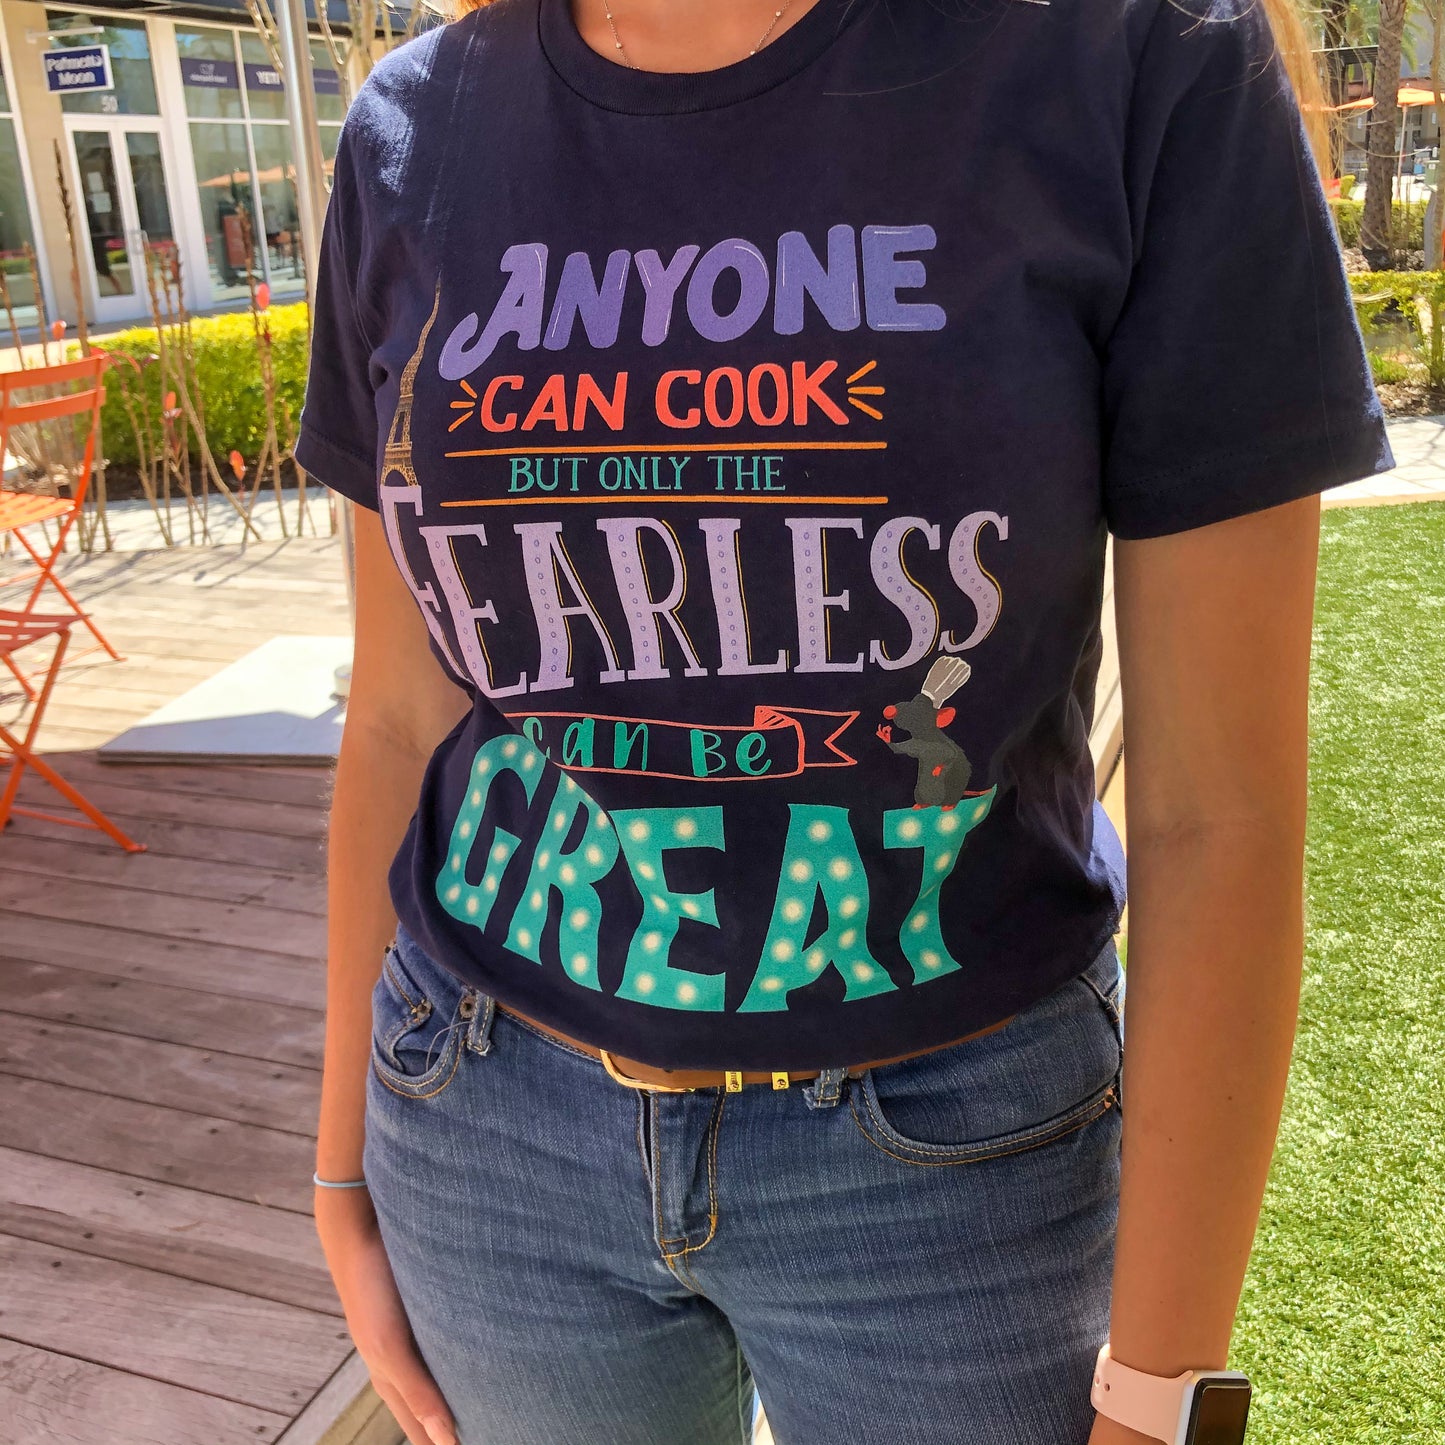 Anyone can cook, but only the fearless can be great Shirt